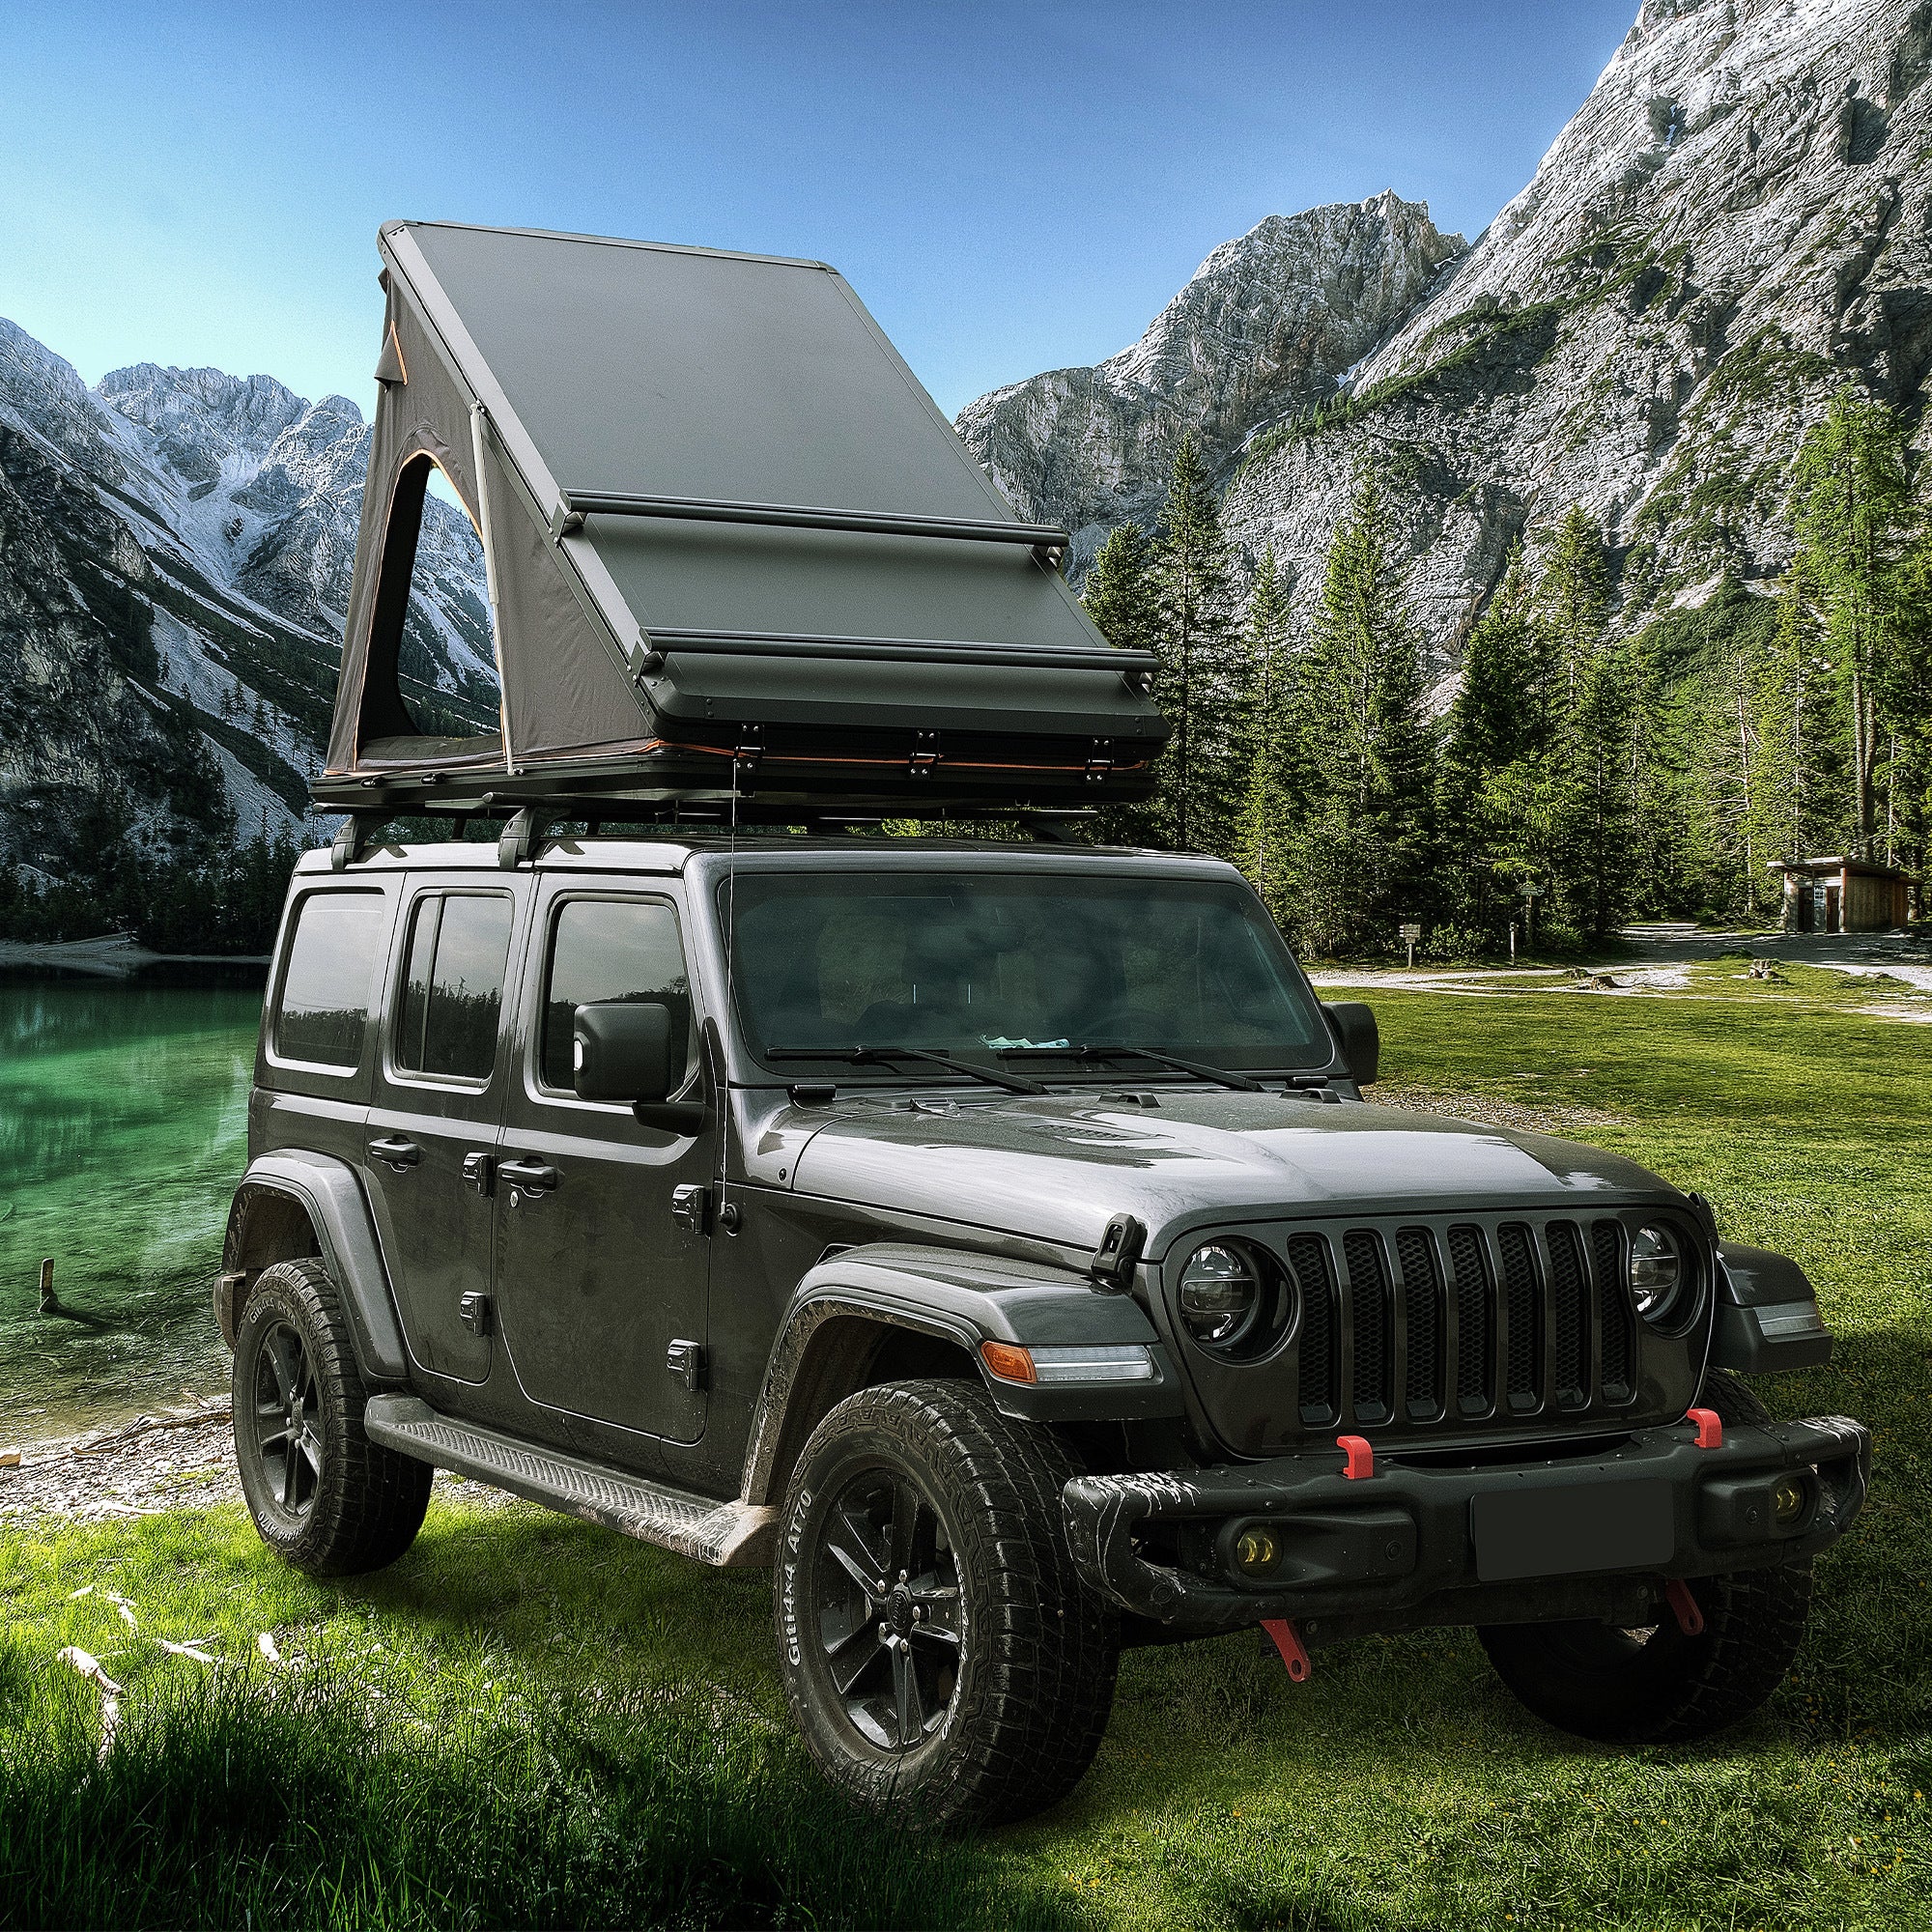 Trustmade Scout Plus Series - Triangular Hard Shell Rooftop Tent with Roof Rack assembled on truck with ladder at mountains